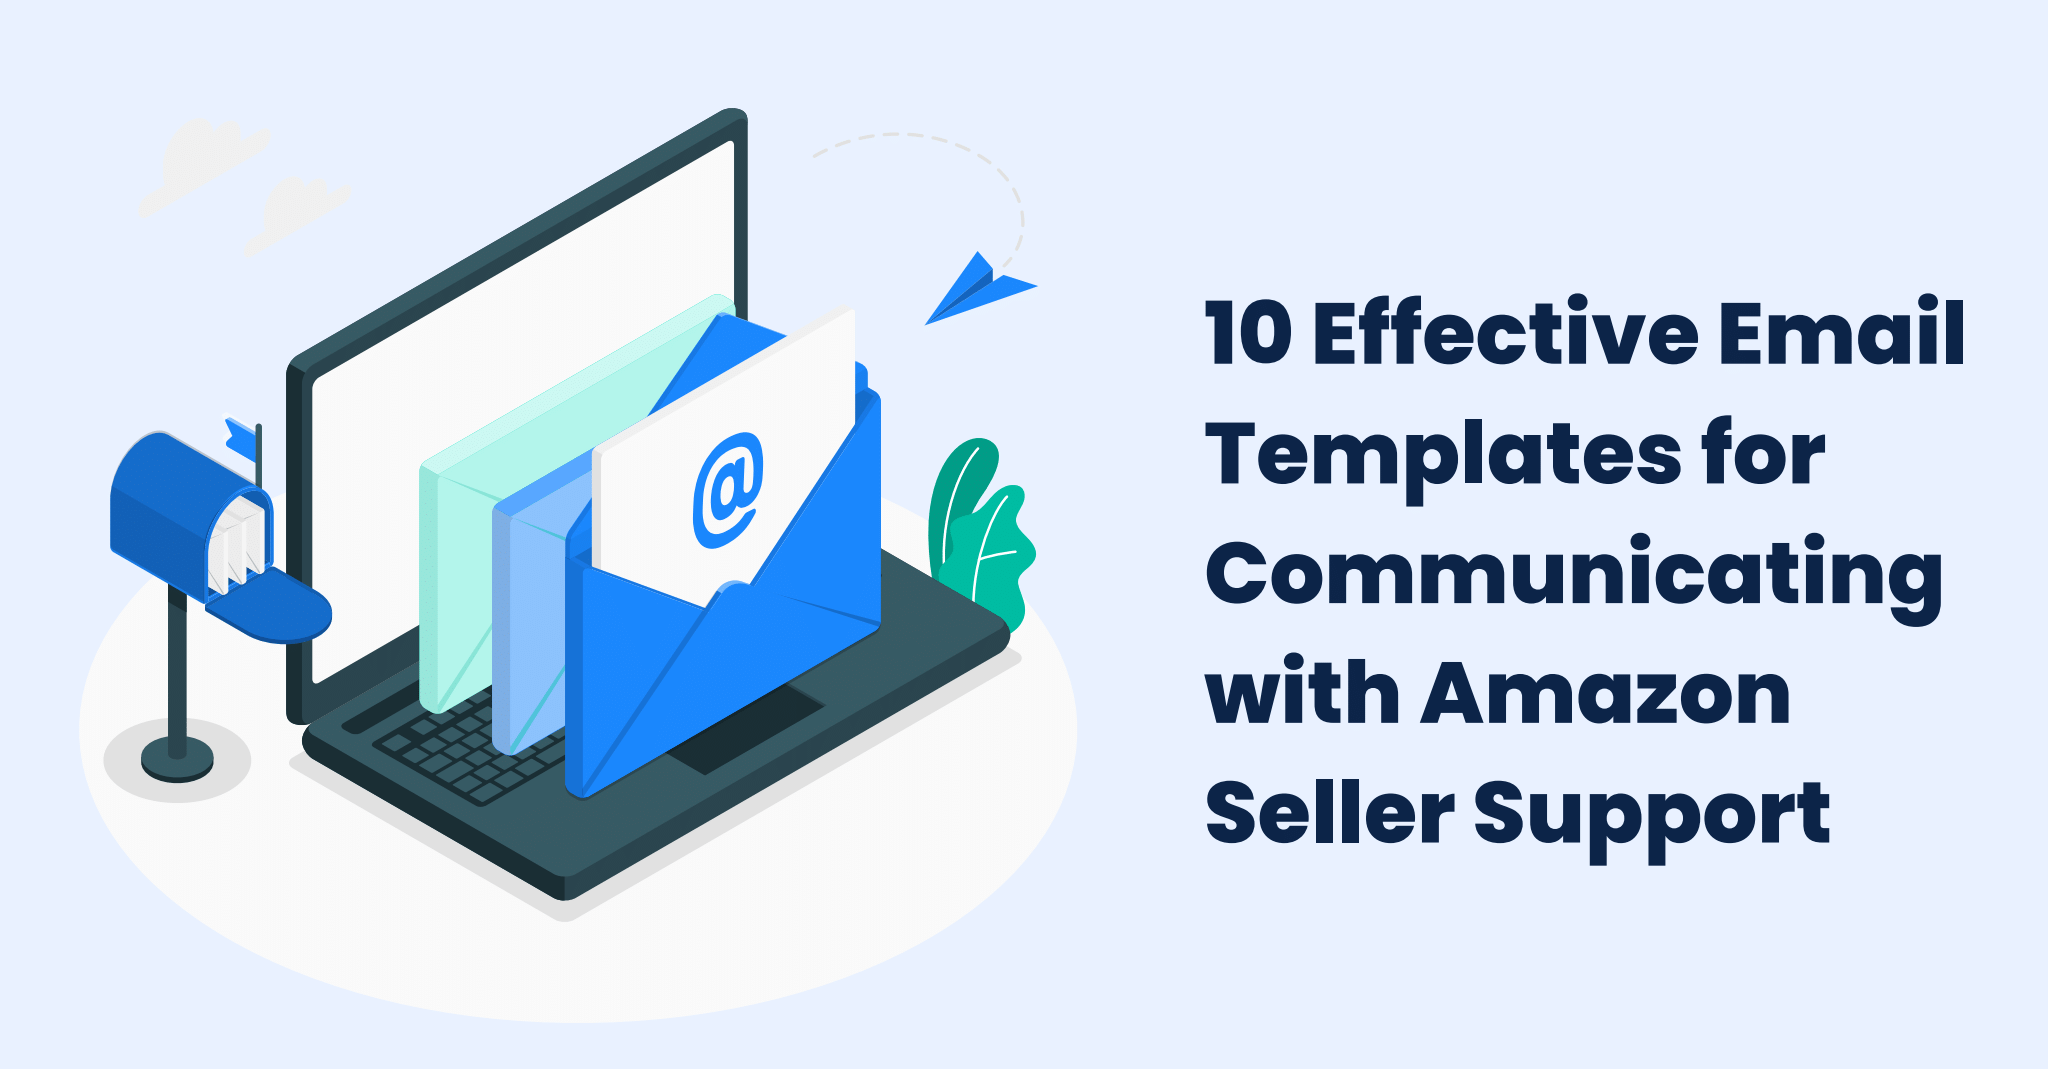 10 Effective Email Templates for Communicating with Amazon Seller Support